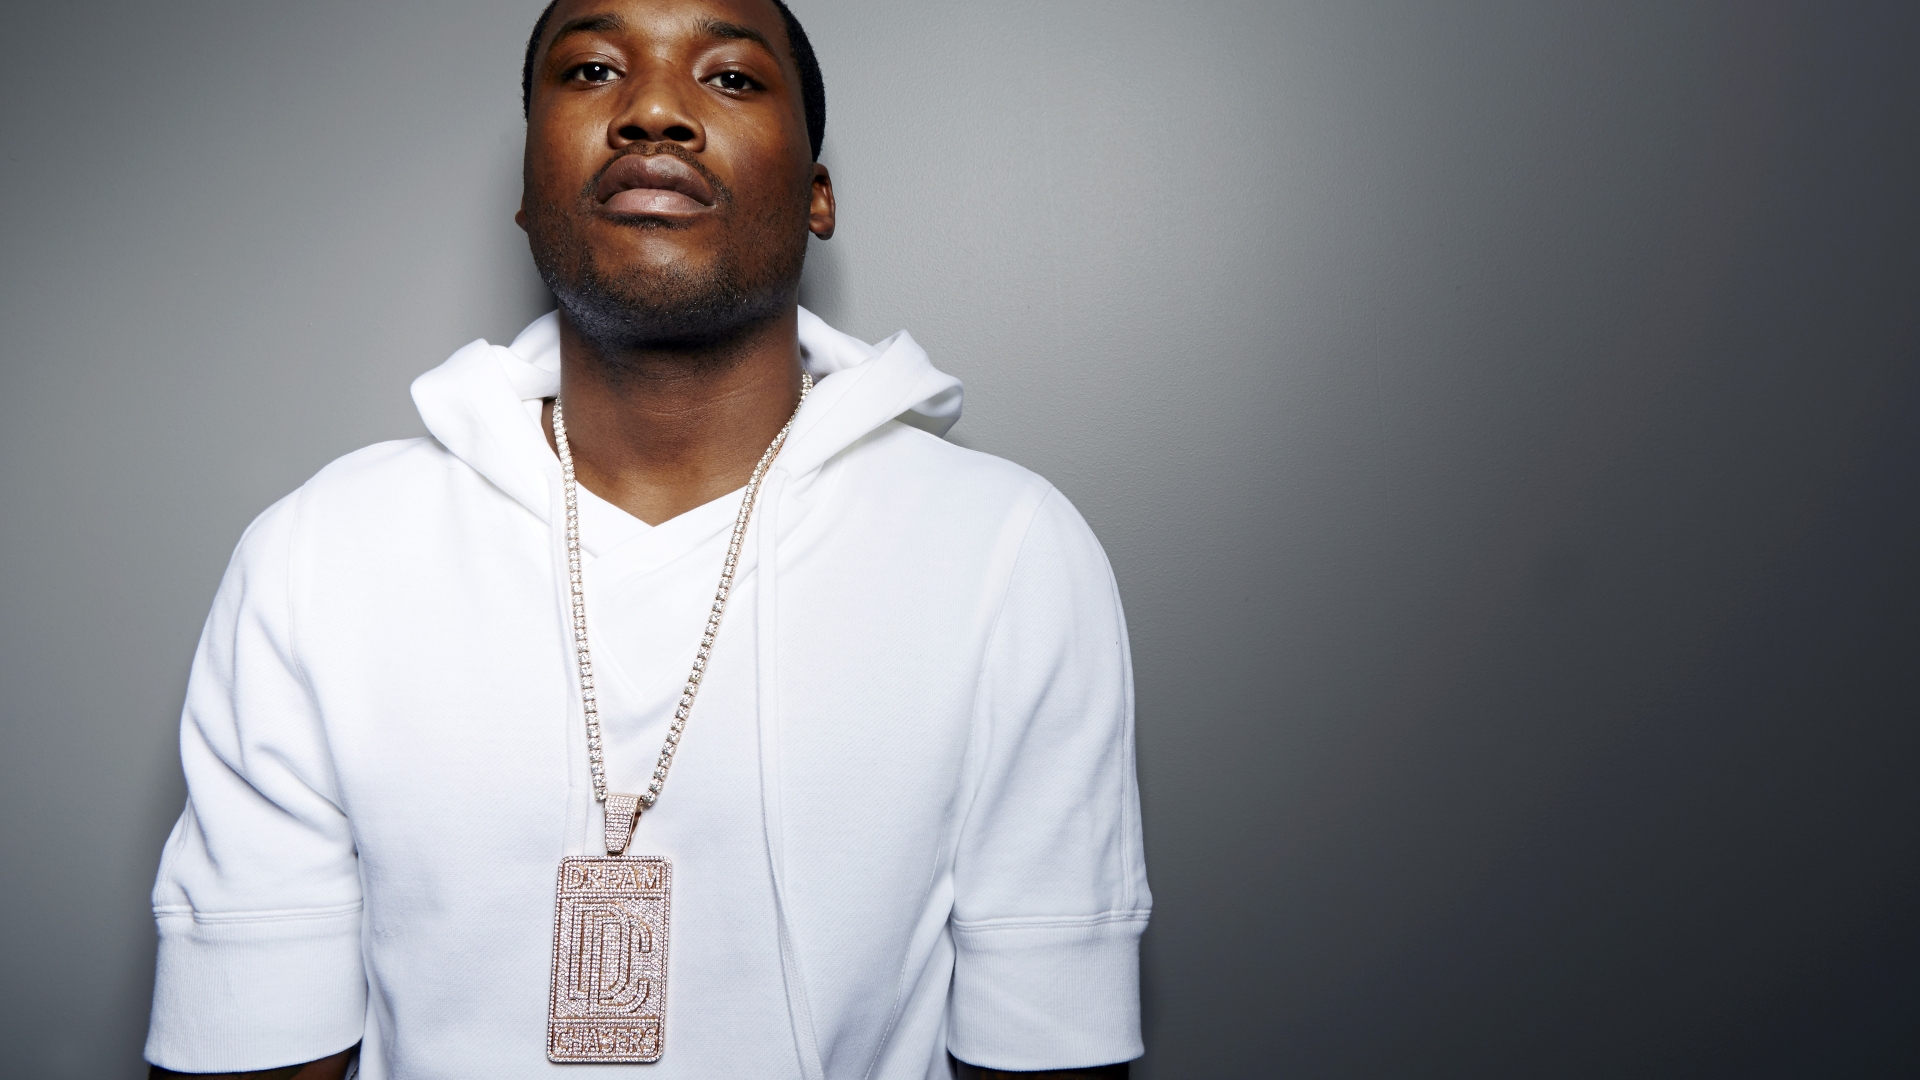 Meek Mill Look for 1920 x 1080 HDTV 1080p resolution